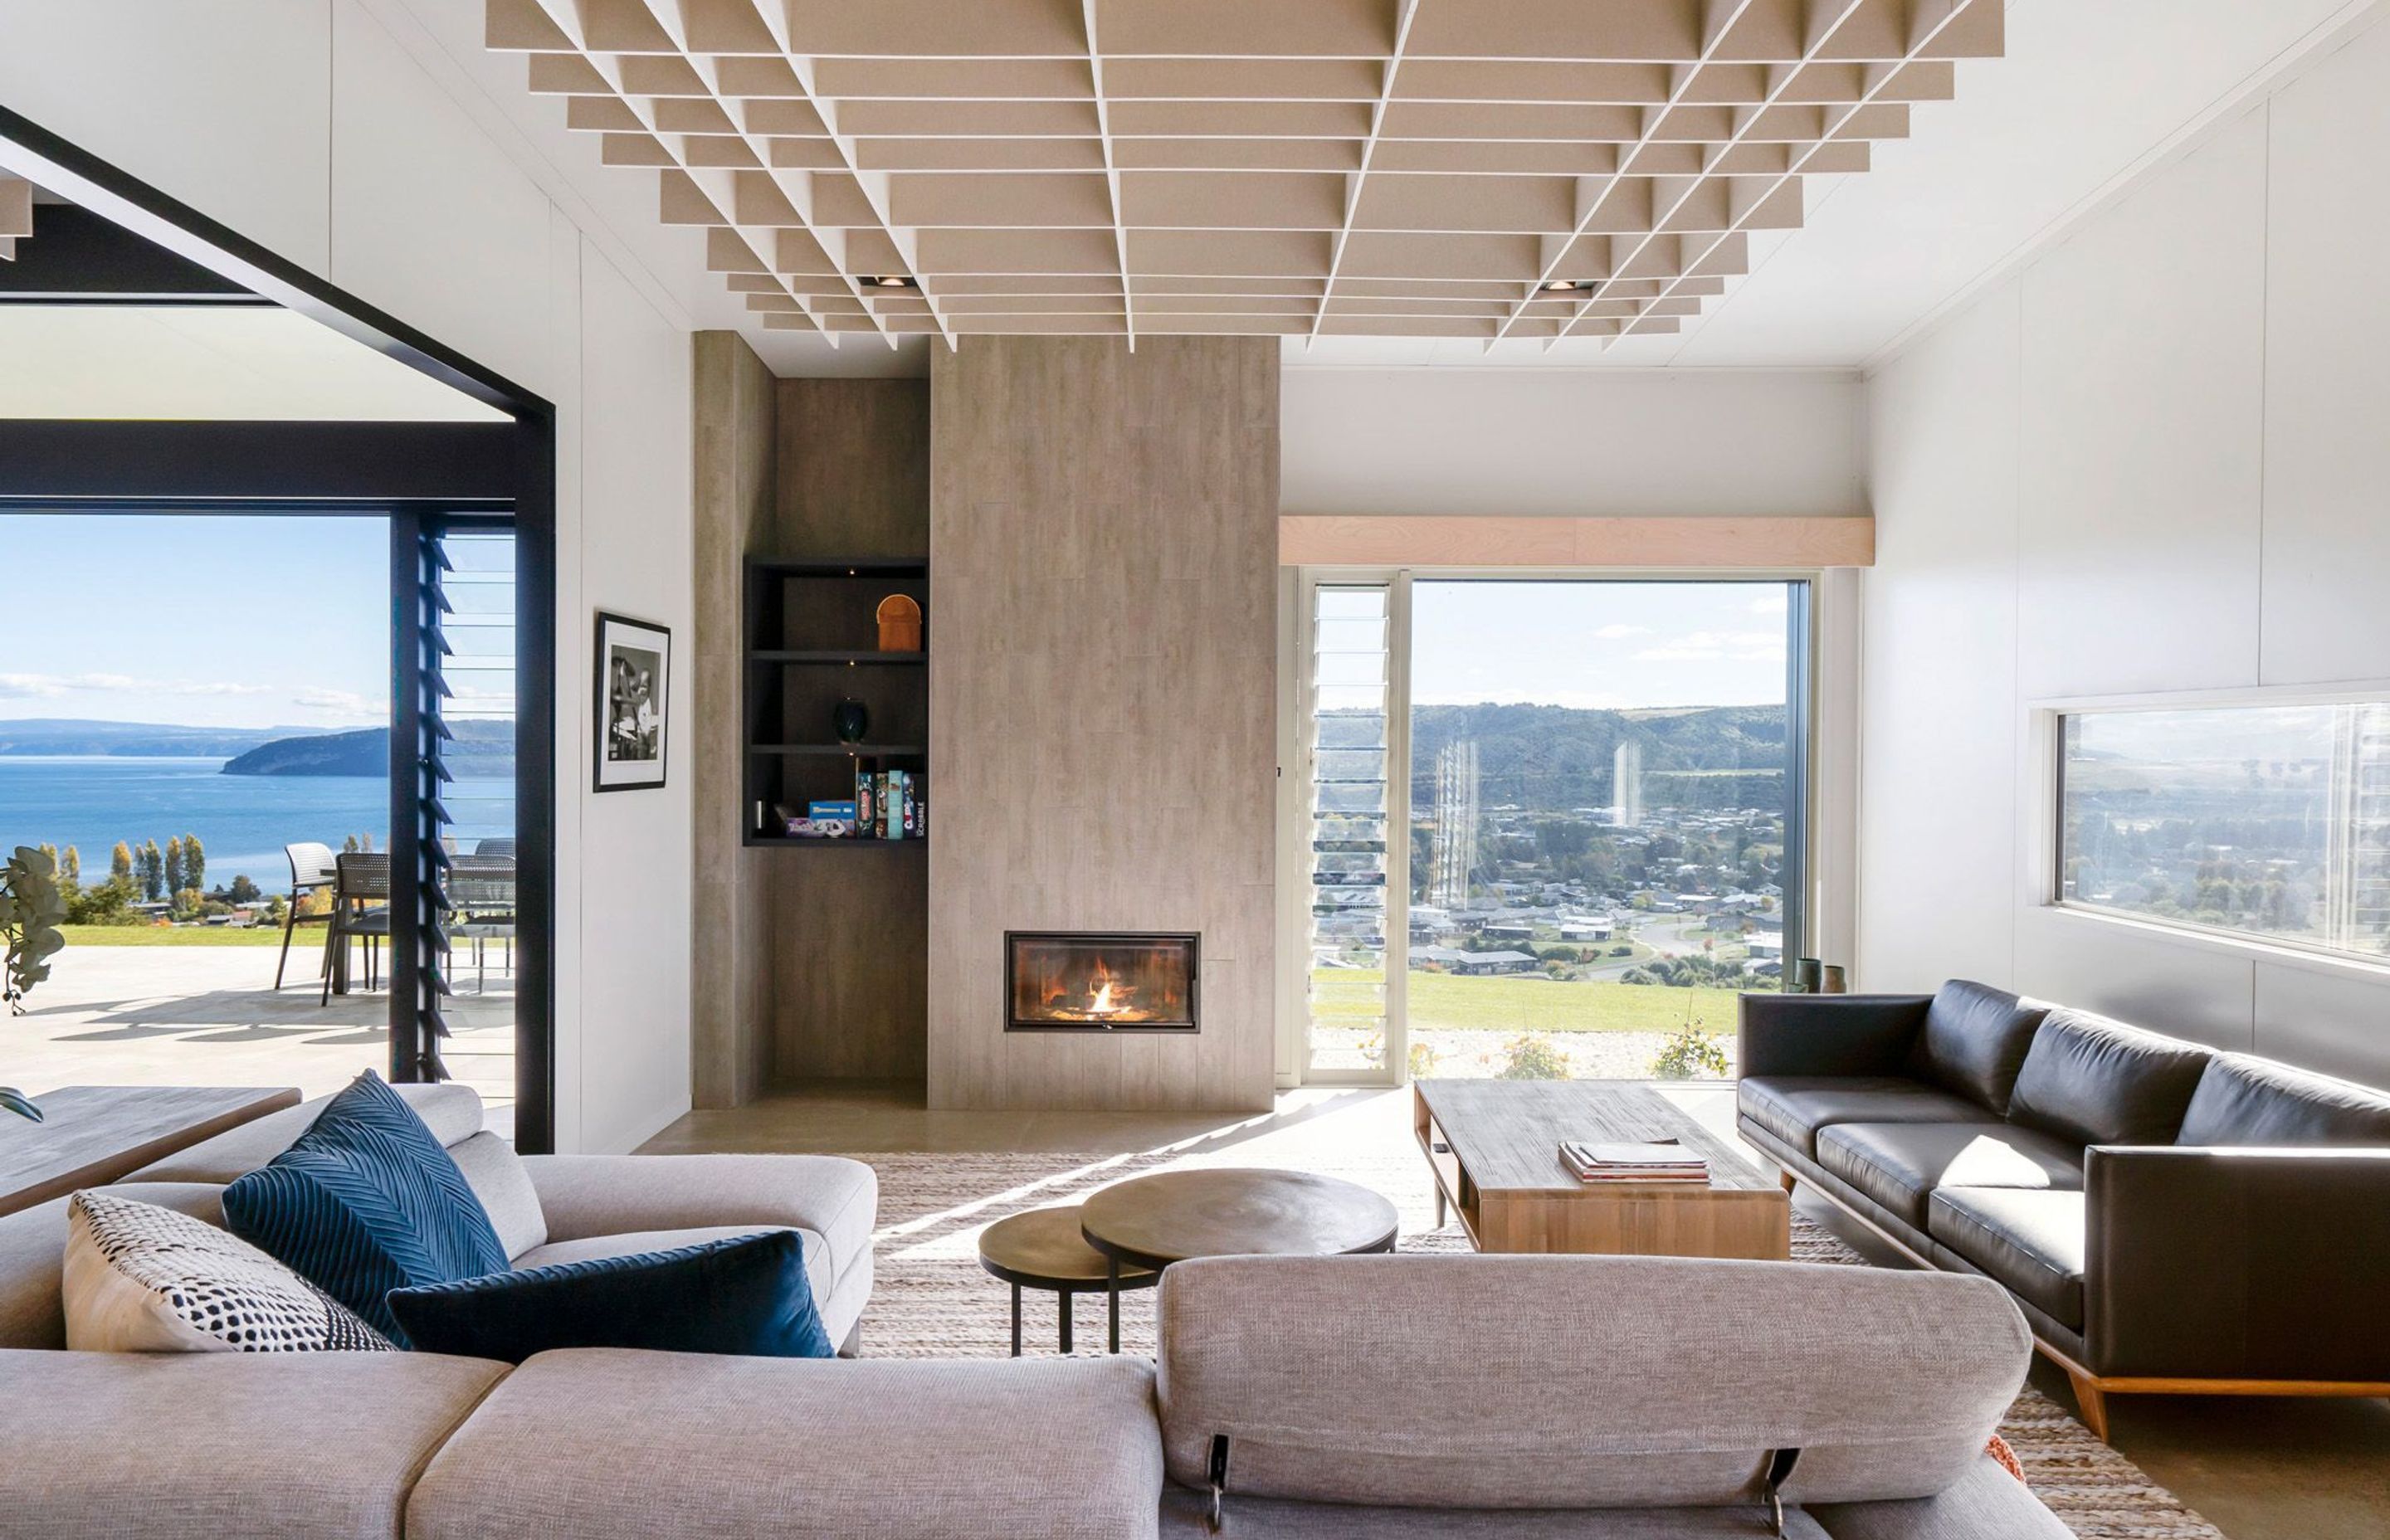 This lounge is the perfect place to relax with its roaring fire inside and floor-to-ceiling views of Lake Taupo and the surrounding landscape. Photograph: ArchiPro.